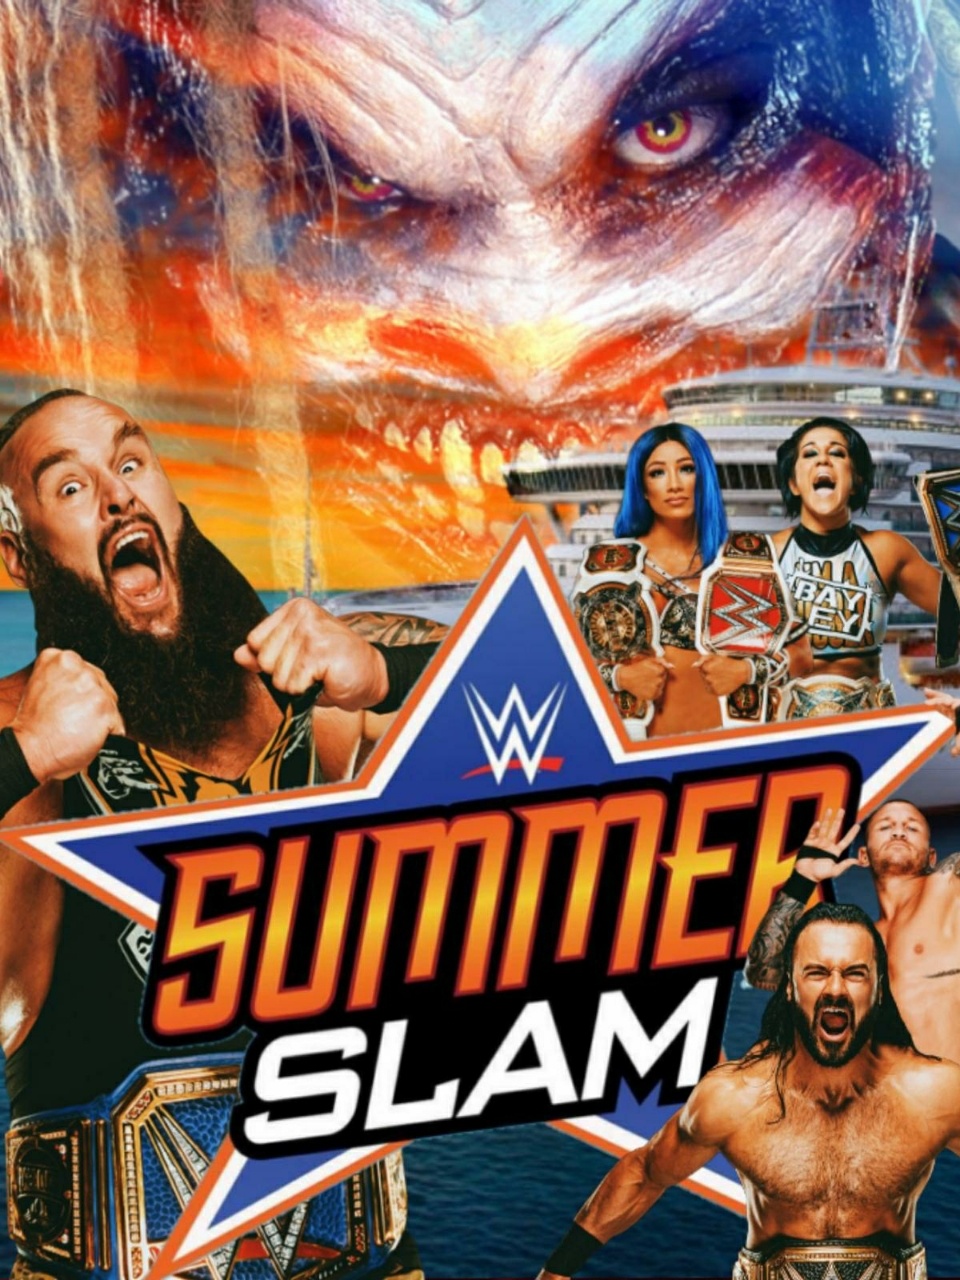 WWE SummerSlam Live results August 24, 2020 LIVE streaming in India How to watch it on AirtelTV, SonyLiv and JioTV, Check details